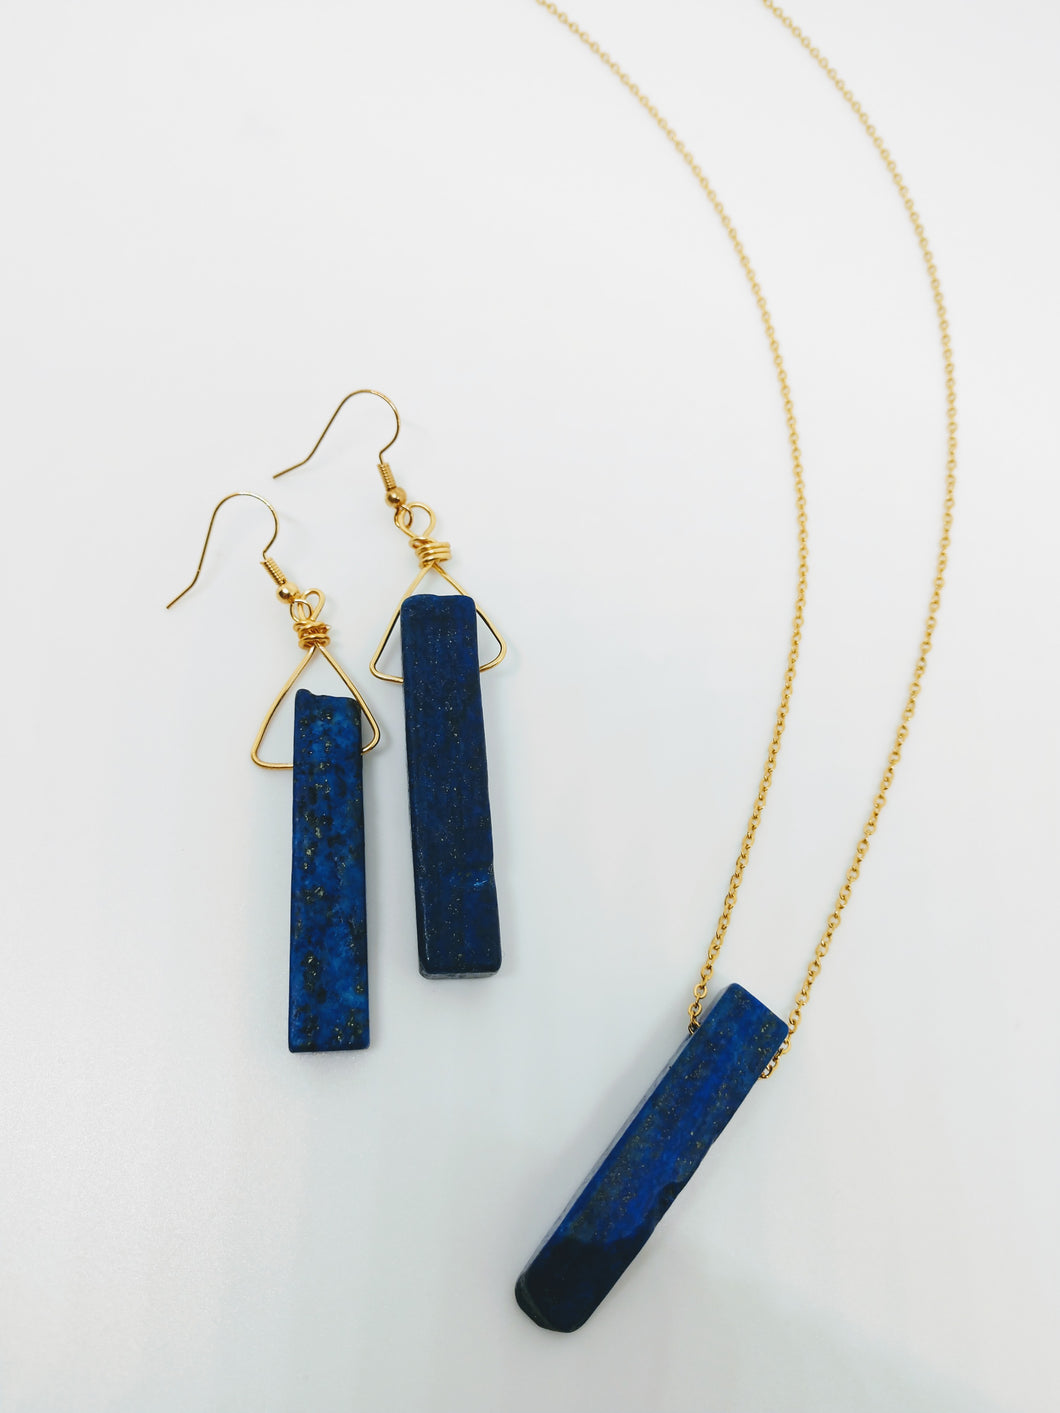 Midnight Magic Necklace and Earrings Set